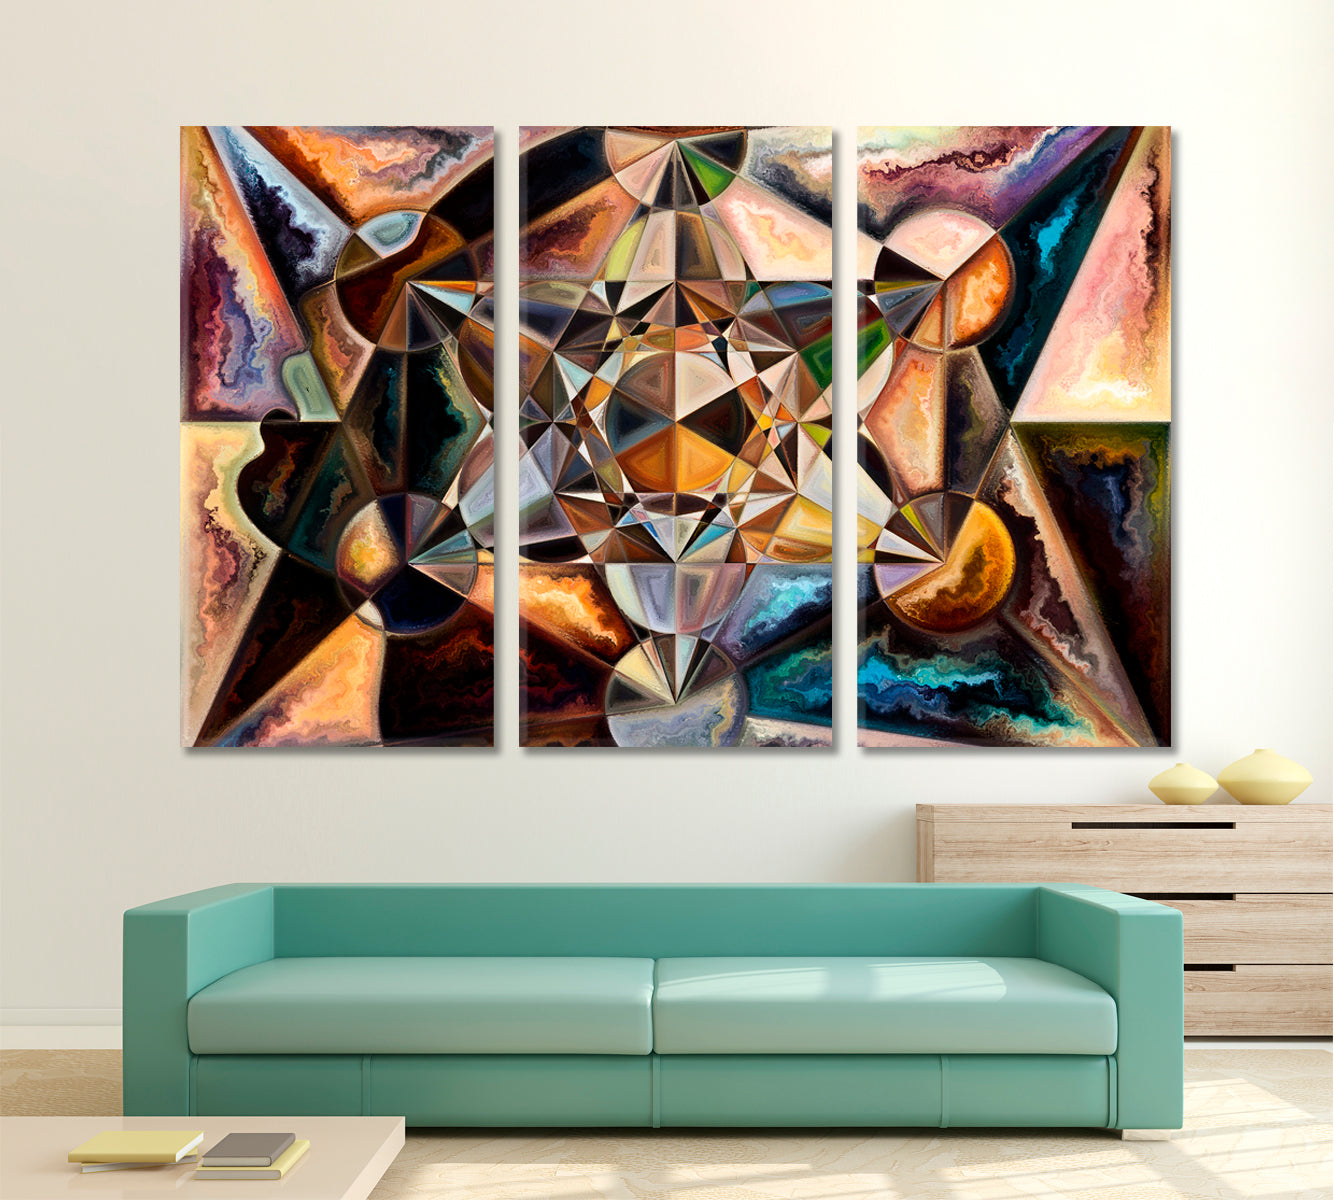 ABSTRACT GEOMETRIC FORMS Eye Catching Patterns Abstract Art Print Artesty 3 panels 36" x 24" 